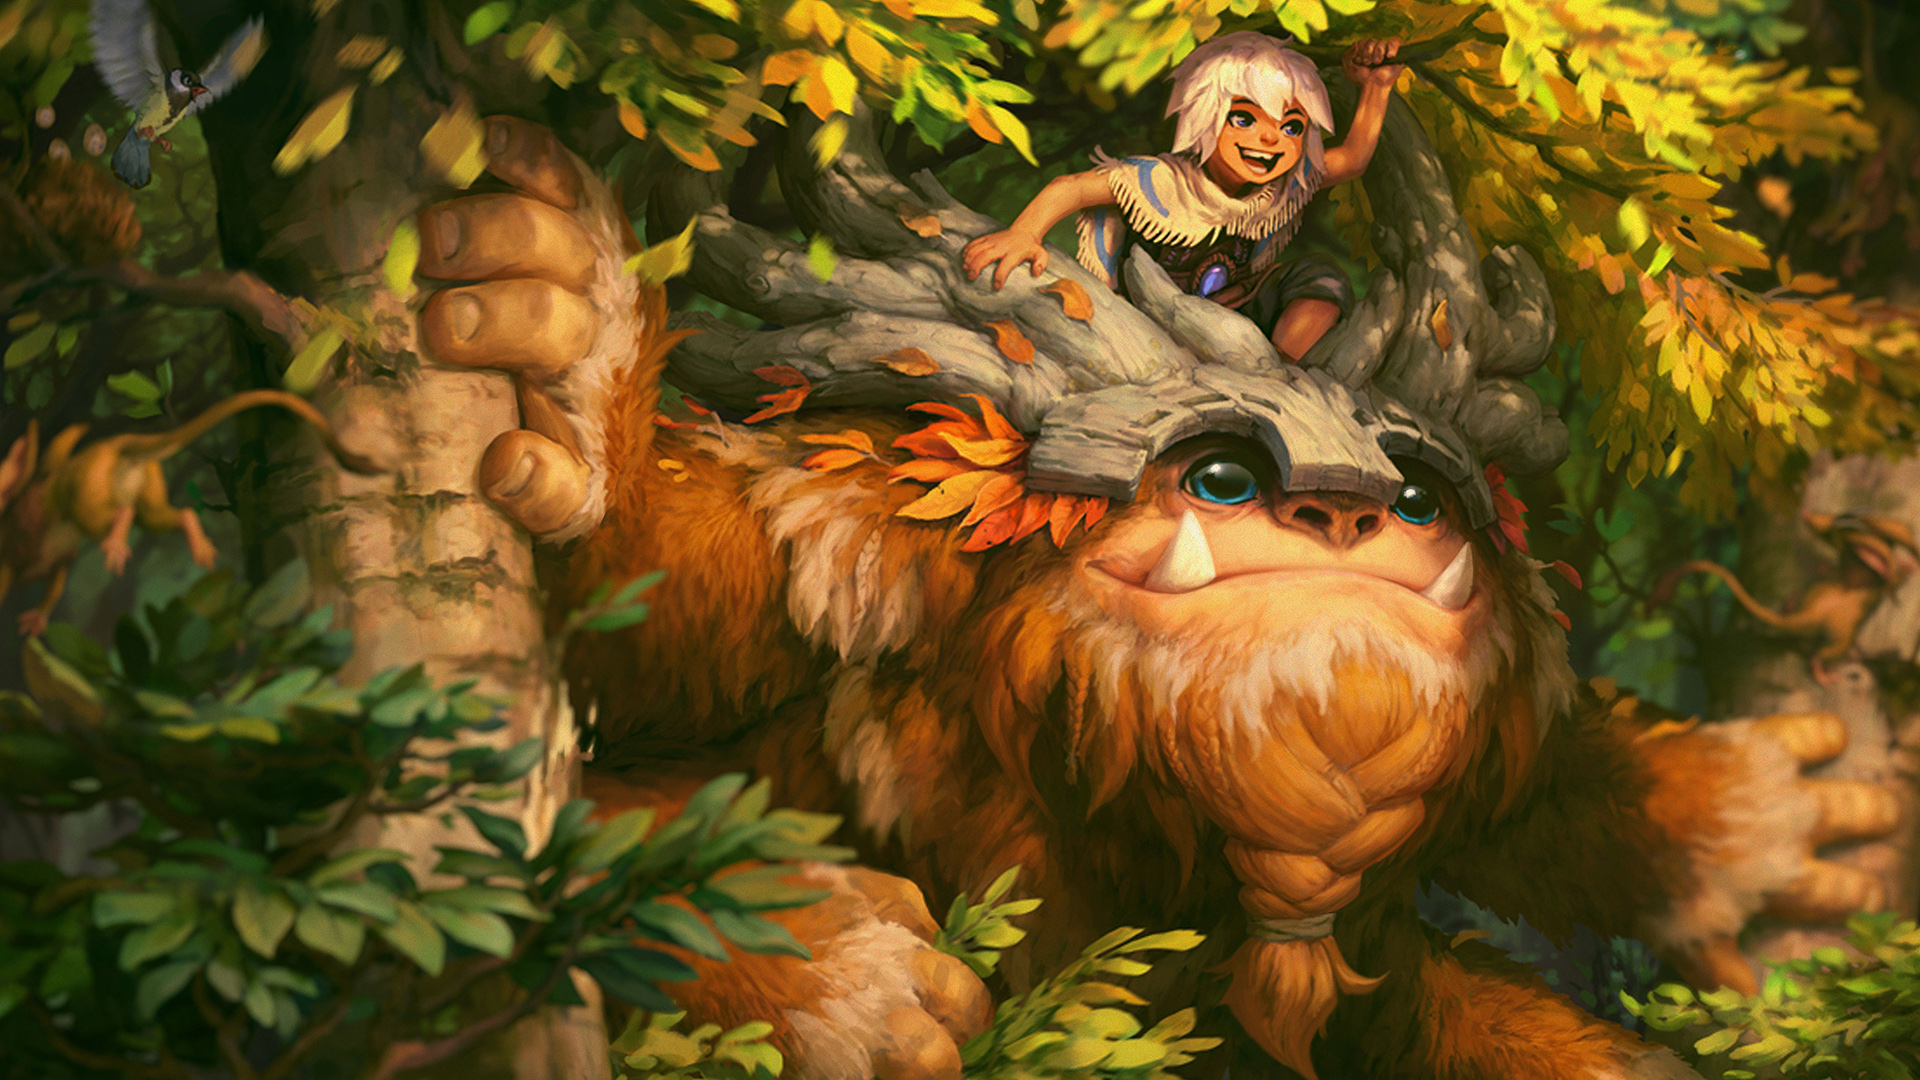 General 1920x1080 League of Legends Nunu & Willump Nunu creature PC gaming digital art video games video game characters fur video game boys smiling video game creatures fangs closed mouth open mouth leaves hair between eyes trees fallen leaves animals natural light looking away